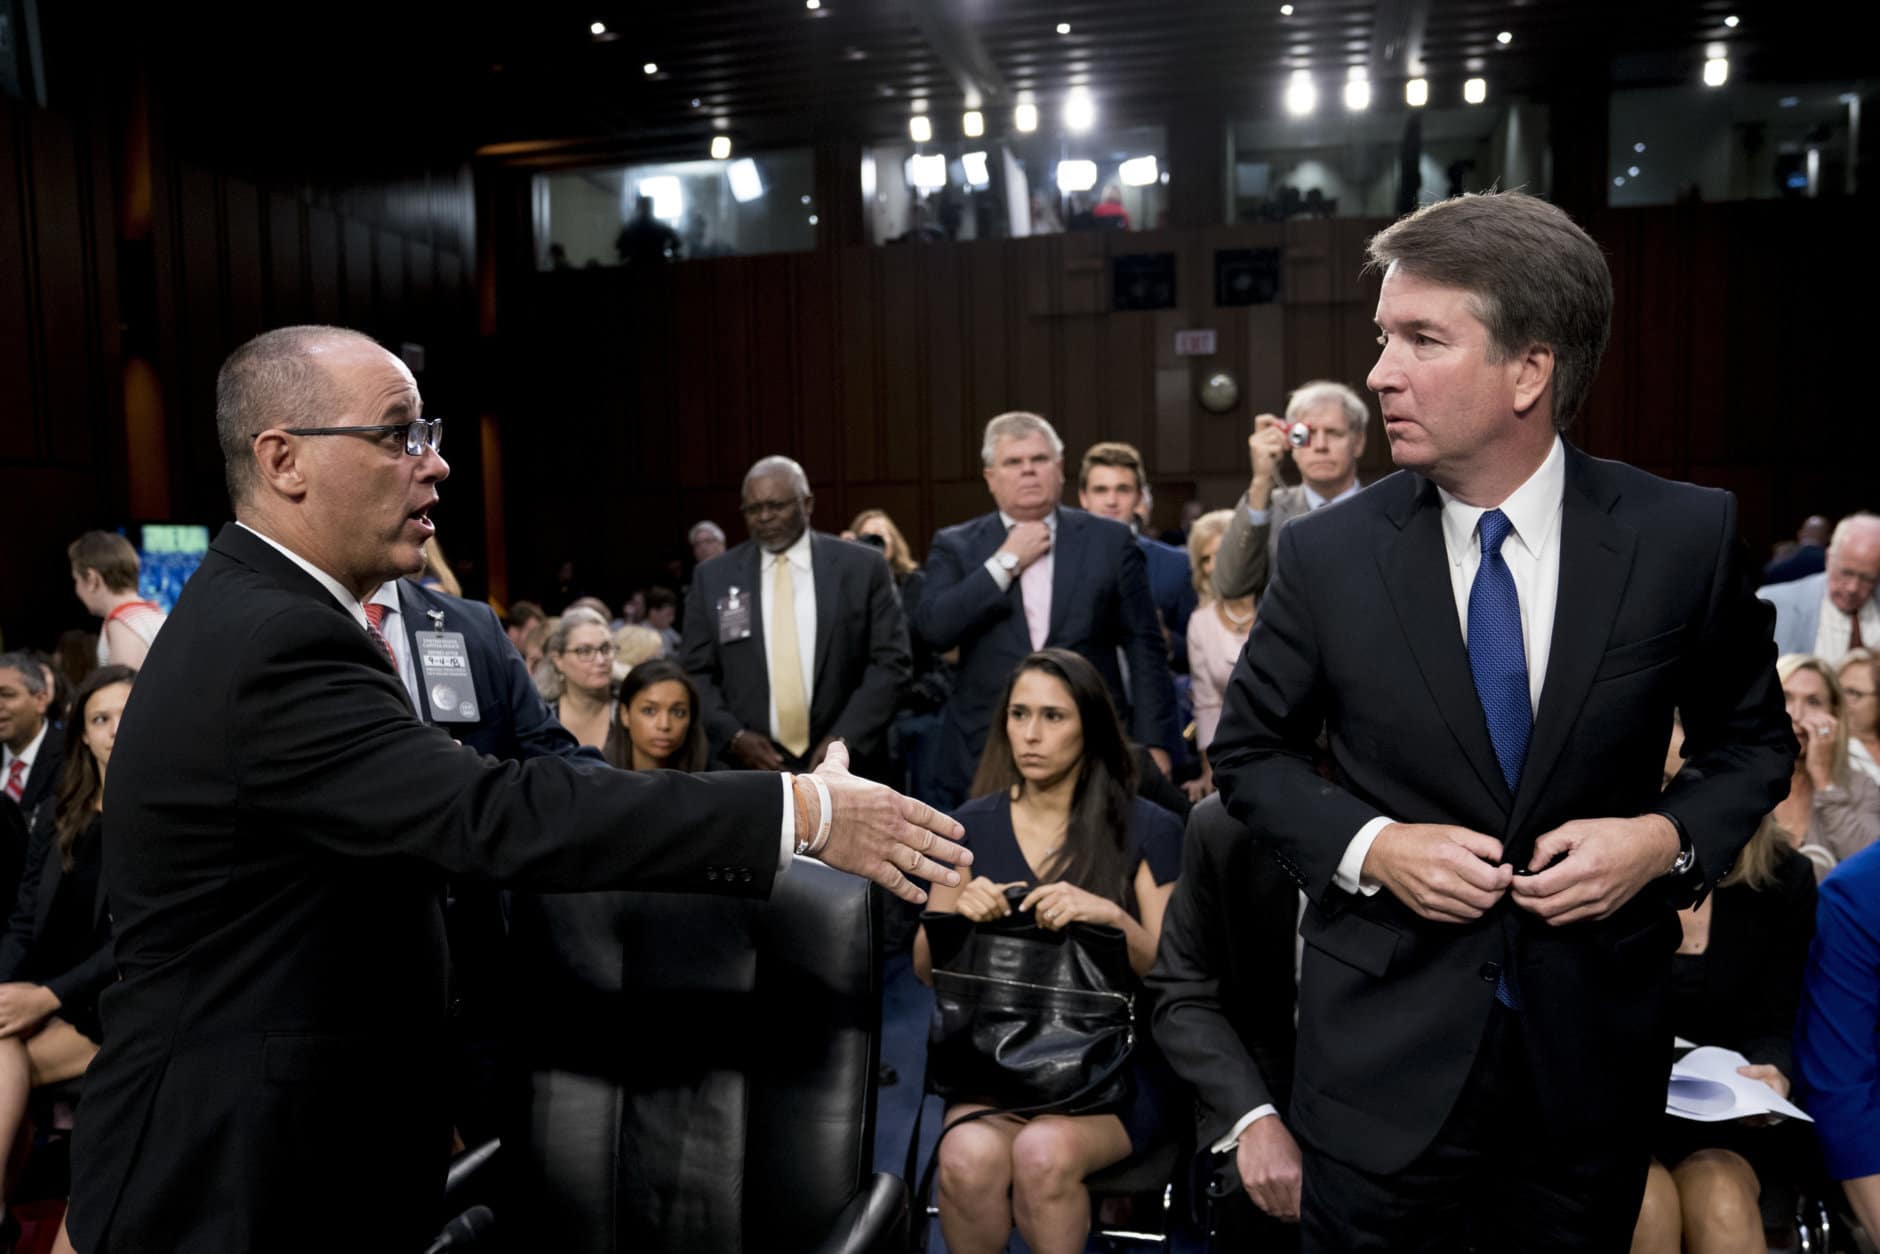 Fred Guttenberg, left, the father of Jamie Guttenberg, who was killed in the high school shooting in Parkland, Fla., attempts to shake hands with Brett Kavanaugh, President Donald Trump's Supreme Court nominee, as he leaves for a lunch break during his appearance before the Senate Judiciary Committee on Capitol Hill in Washington on Sept. 4, 2018. Kavanaugh did not shake his hand. (AP Photo/Andrew Harnik)